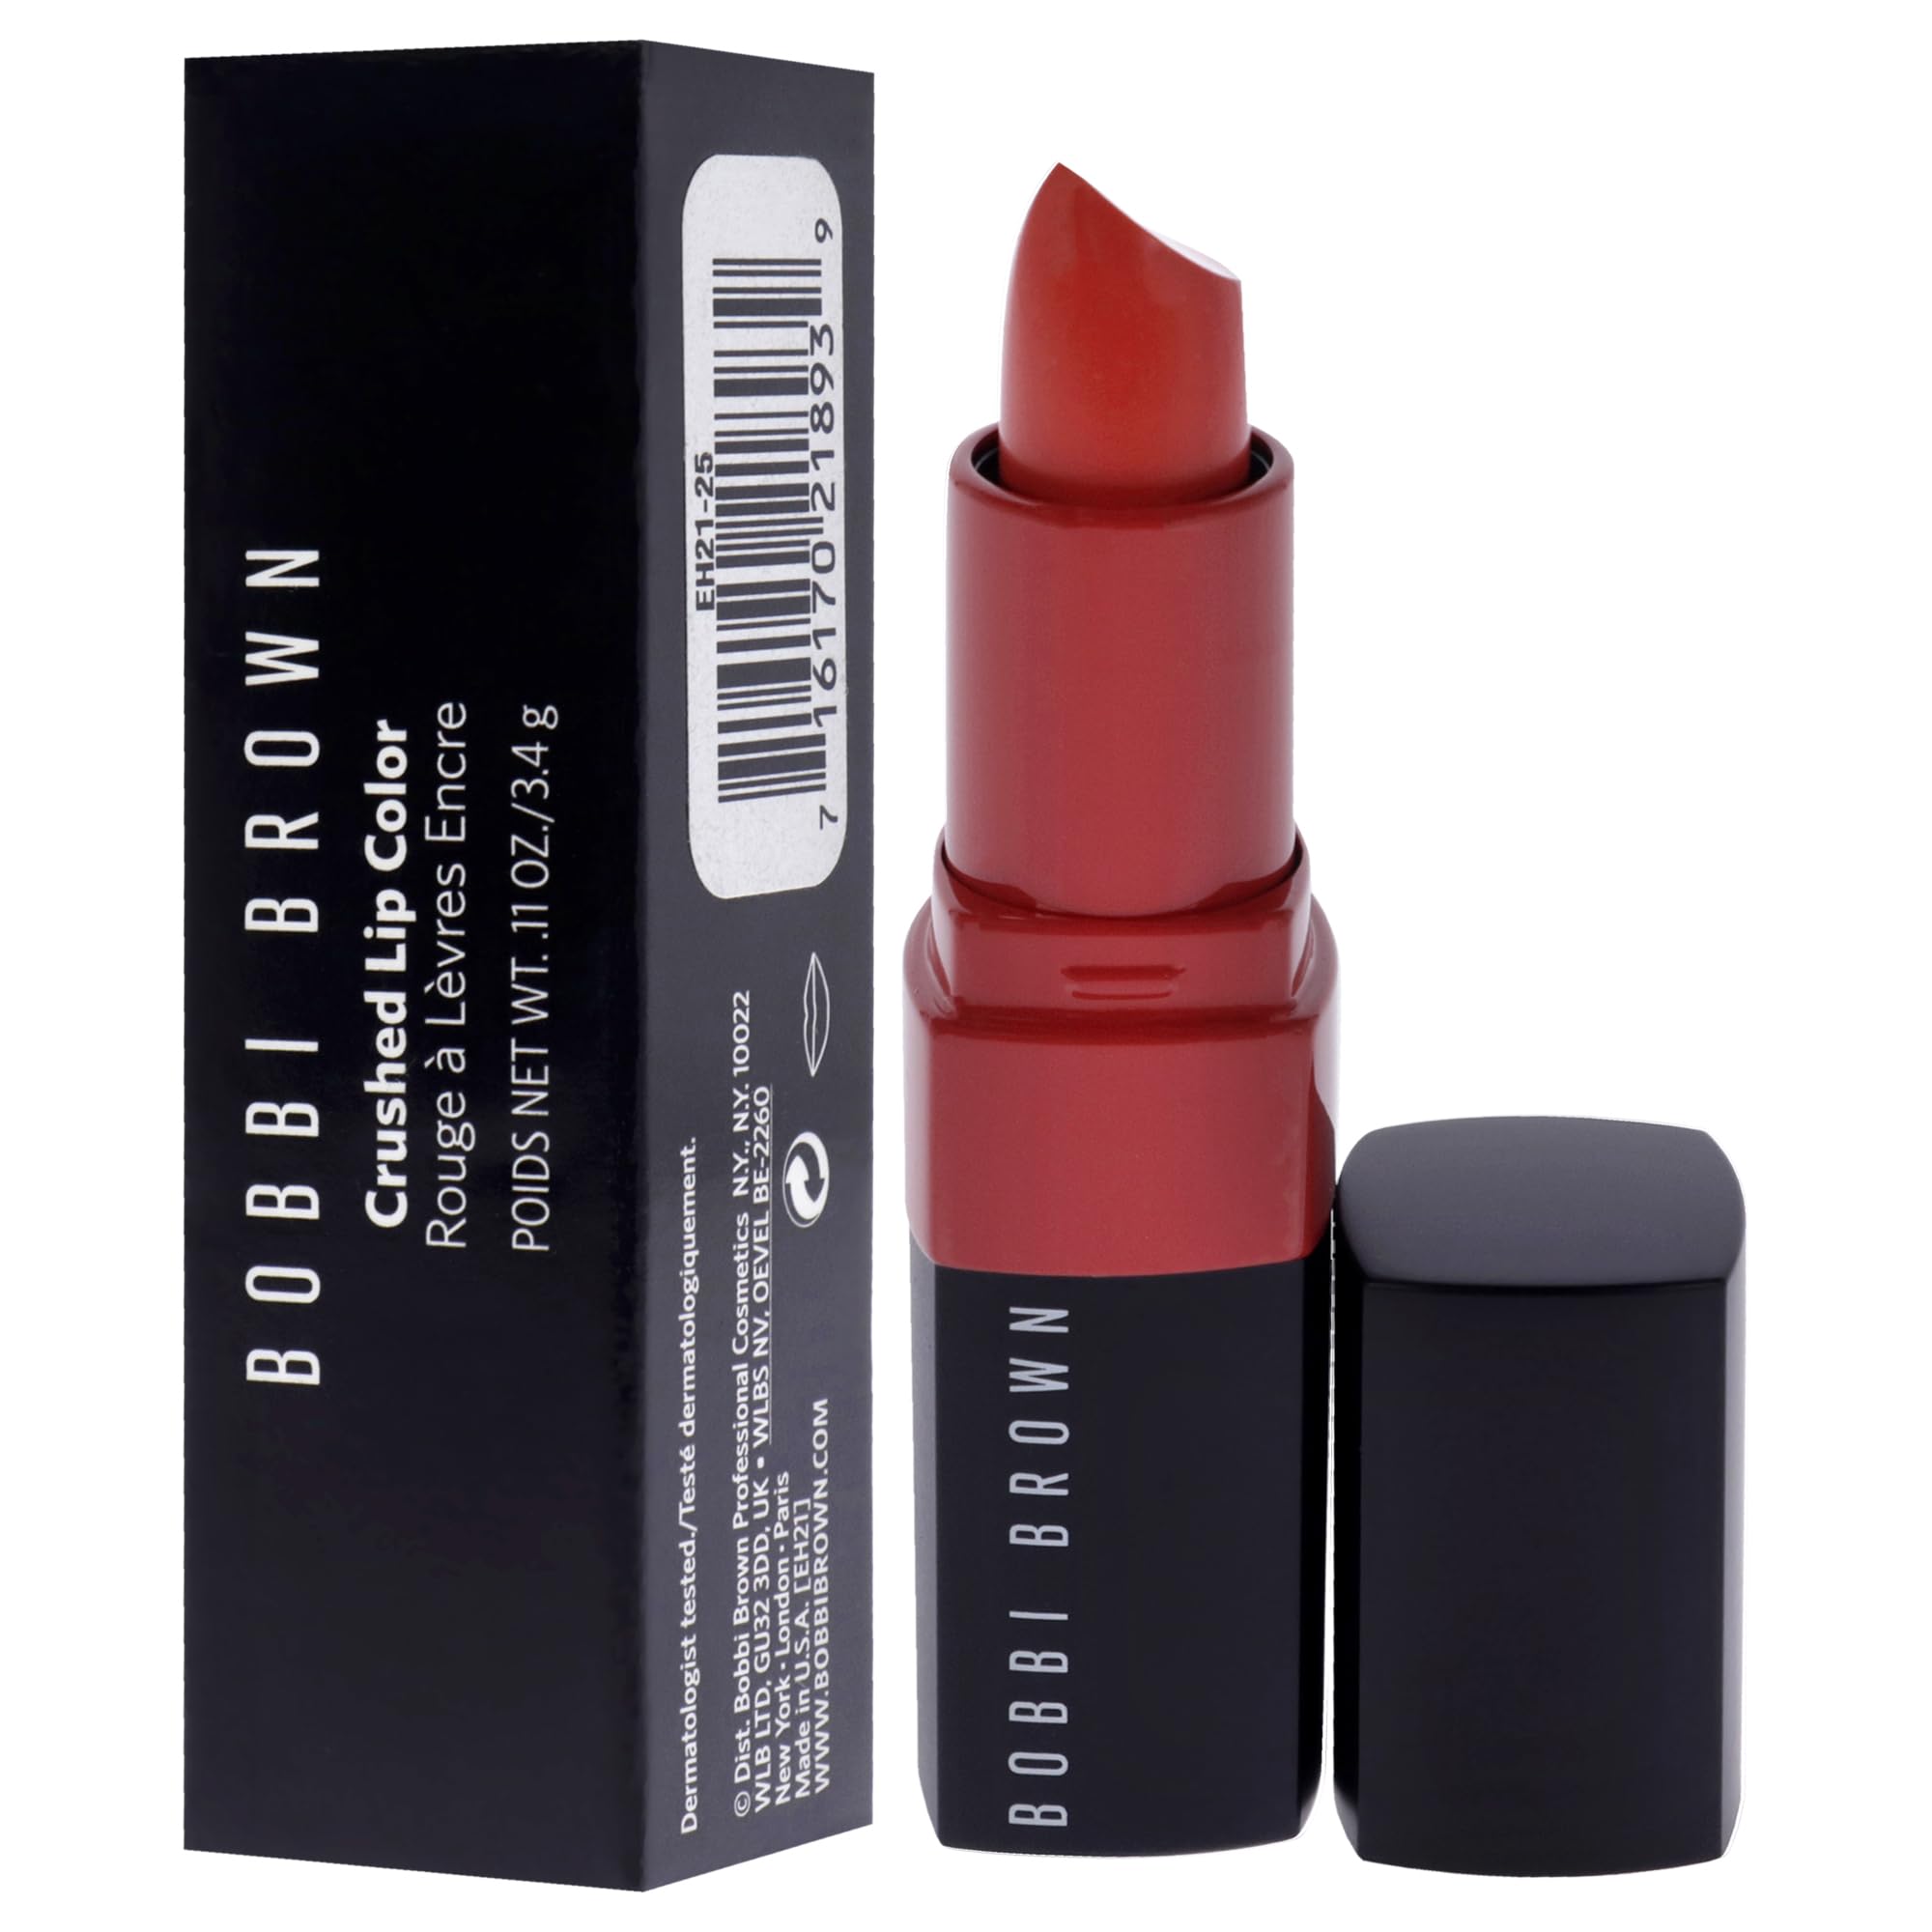 Bobbi Brown Crushed Lip Colour Molly Wow